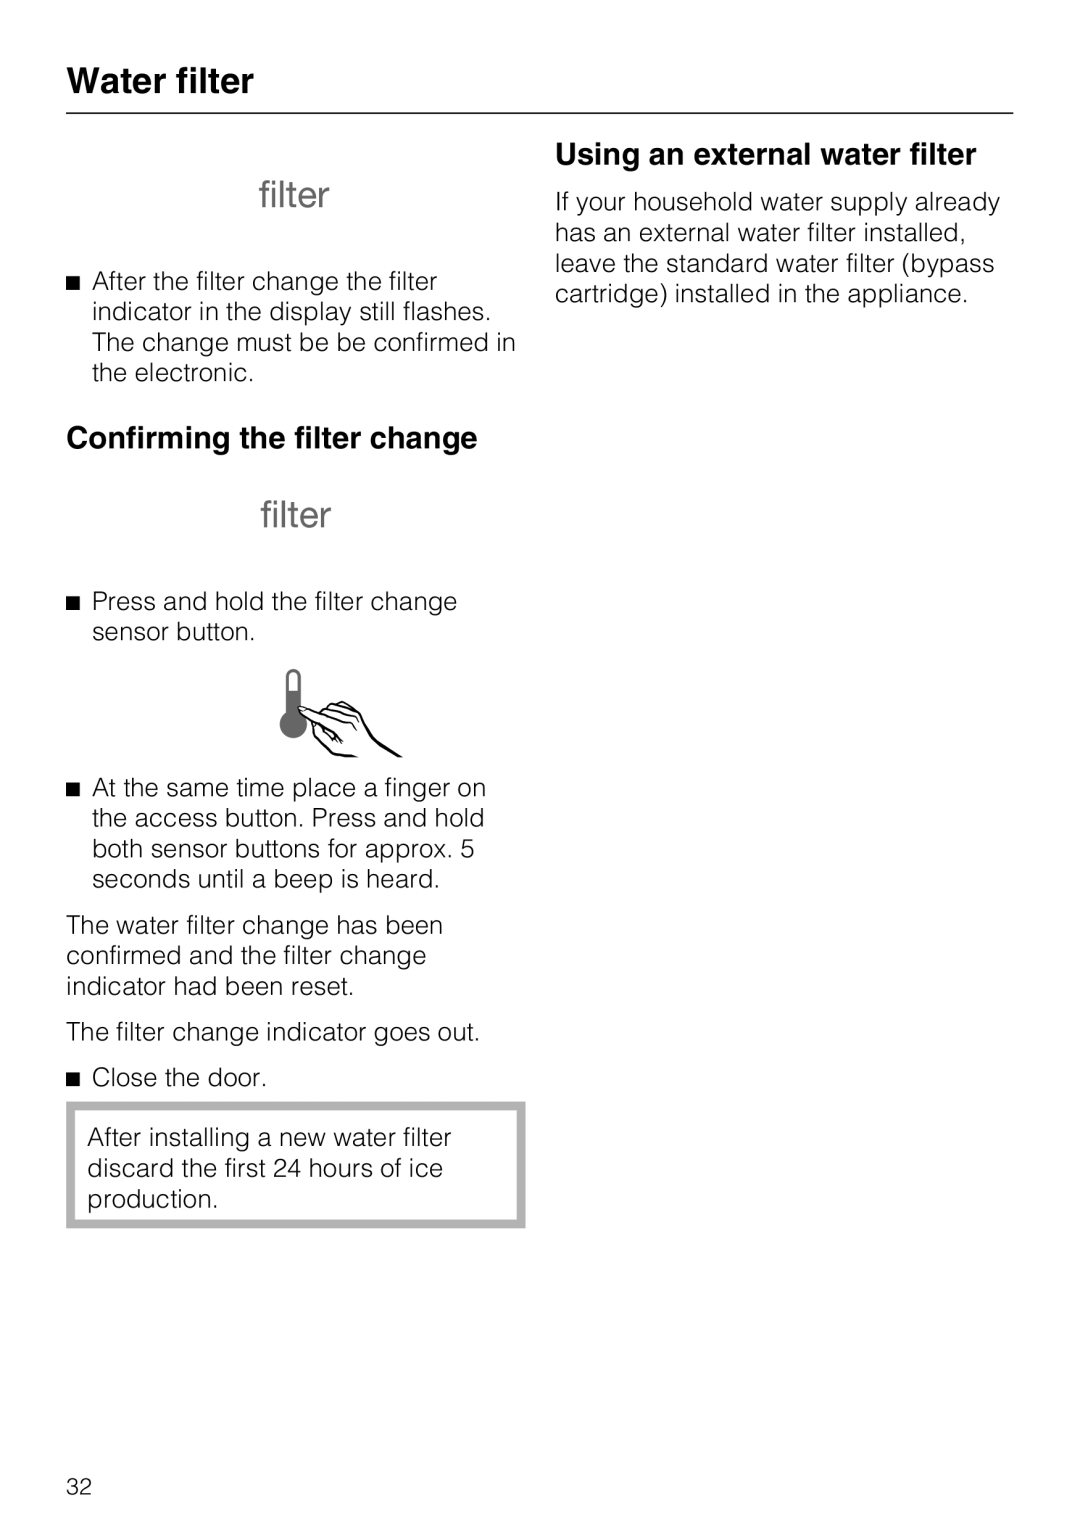 Miele F 1411 Vi installation instructions Confirming the filter change, Using an external water filter, Water filter 